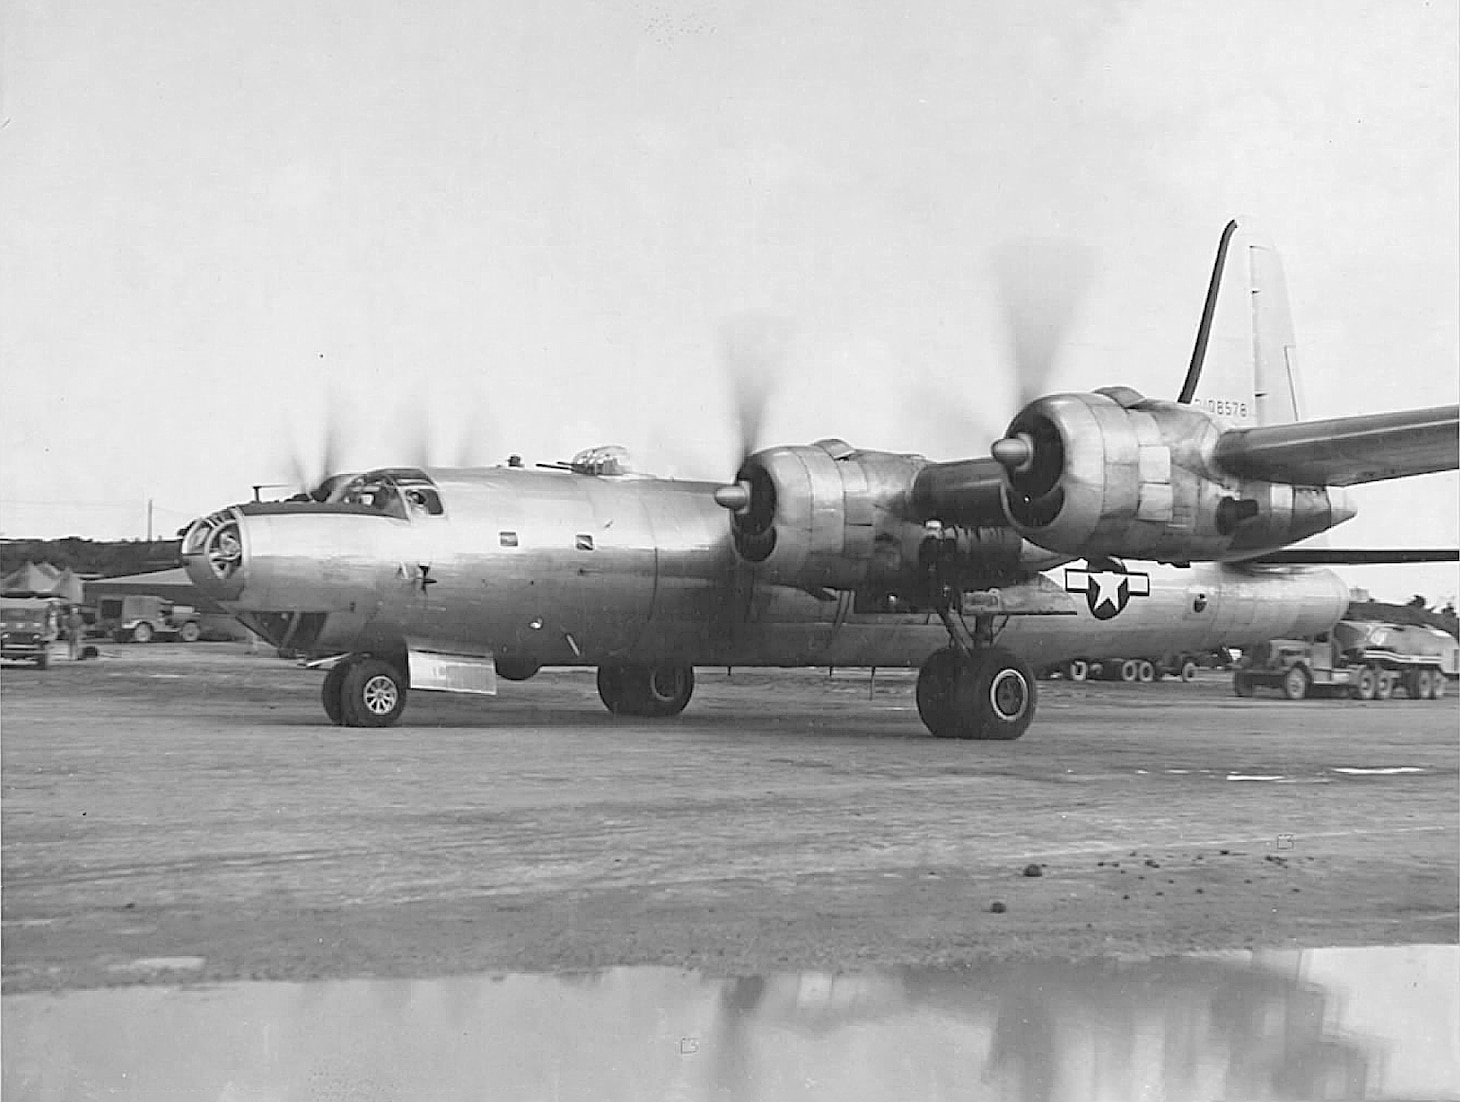 Just before a flight to Luzon in the Philippines on August 25, 1945, this B-32 taxis at Yontan Air Strip (sic) on Okinawa, showing its huge single vertical tail. Originally designed with twin vertical tails, and something of a contestant against Boeing’s advanced B-29, only 115 Convair B-32 Dominators were built, with only 15 of the big bombers seeing very limited action in the final months of the Western Pacific. On August 17, 1945, 2 days after word came of the Japanese surrender, 2 B-32s of the USAAF’s 386thBS, 312th BG were sent out on a photo-recce mission to monitor the state of operations of selected Japanese air bases. Japanese Navy fighters intercepted them and attacked the Dominators. Among the attackers was newly promoted (August 1, 1945) high-scoring Navy ace Ltjg. Saburo Sakai flying an N1K1 Shiden (code-named “George”). He had lost his right eye on August 7, 1942, flying a Zero and attacking SBD Dauntlesses over Guadalcanal. His tortured flight back to his base on Rabaul became one of the epochal survival stories of the Pacific air war. Although Sakai’s accepted total is 64 kills in China and the Pacific, many historians now believe his total was much less, perhaps no less than 28. Actually, Sakai, himself never made the claim his total was 64. (National  Archives and Records Administration)